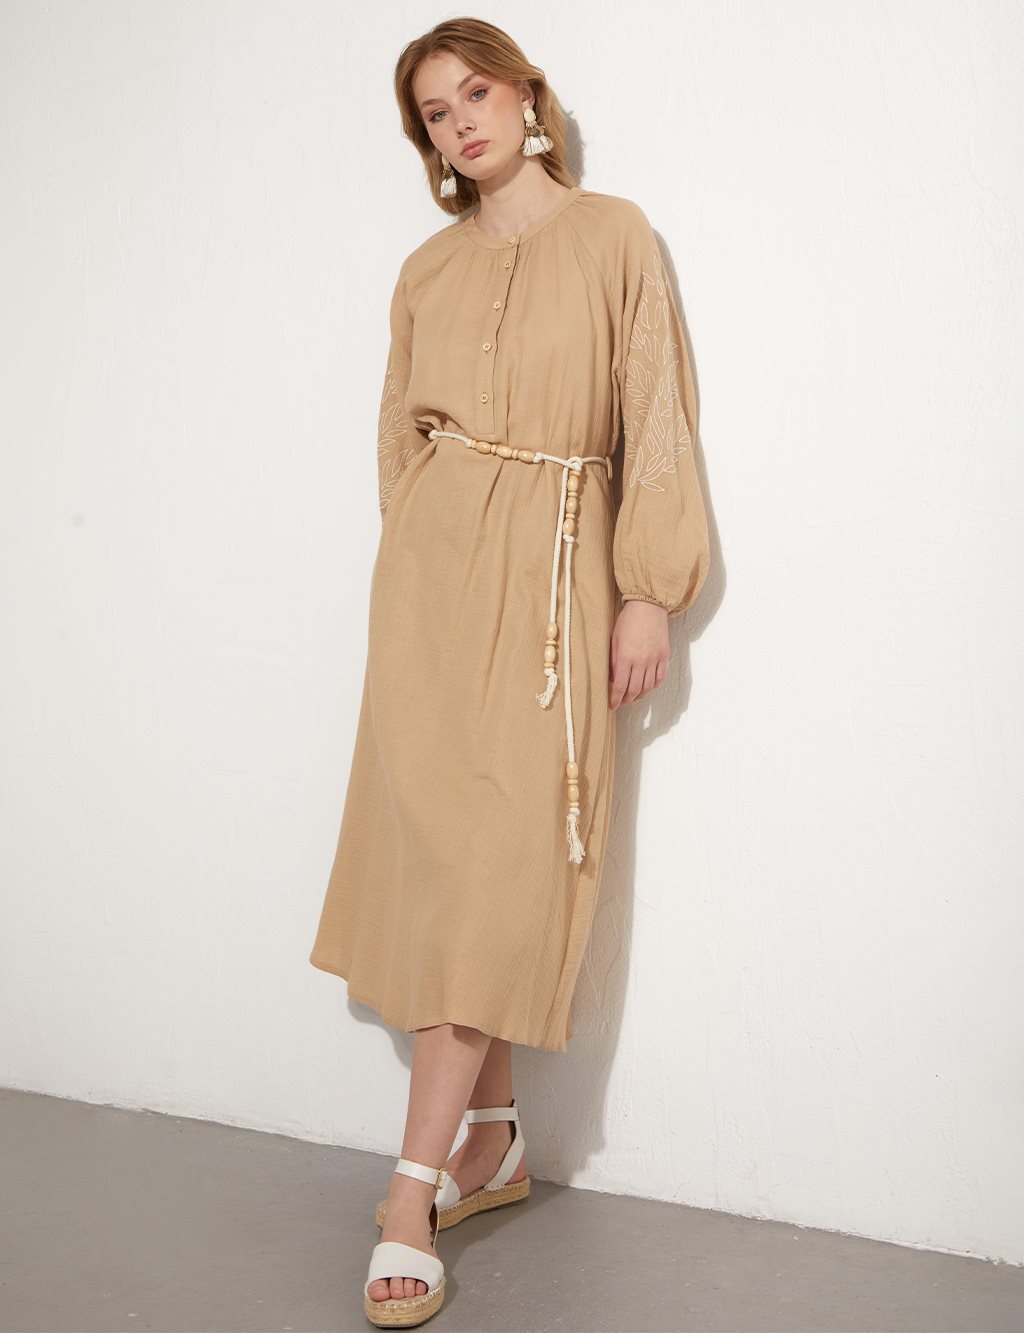 Embroidered Sleeves Dress/Tunic Beige